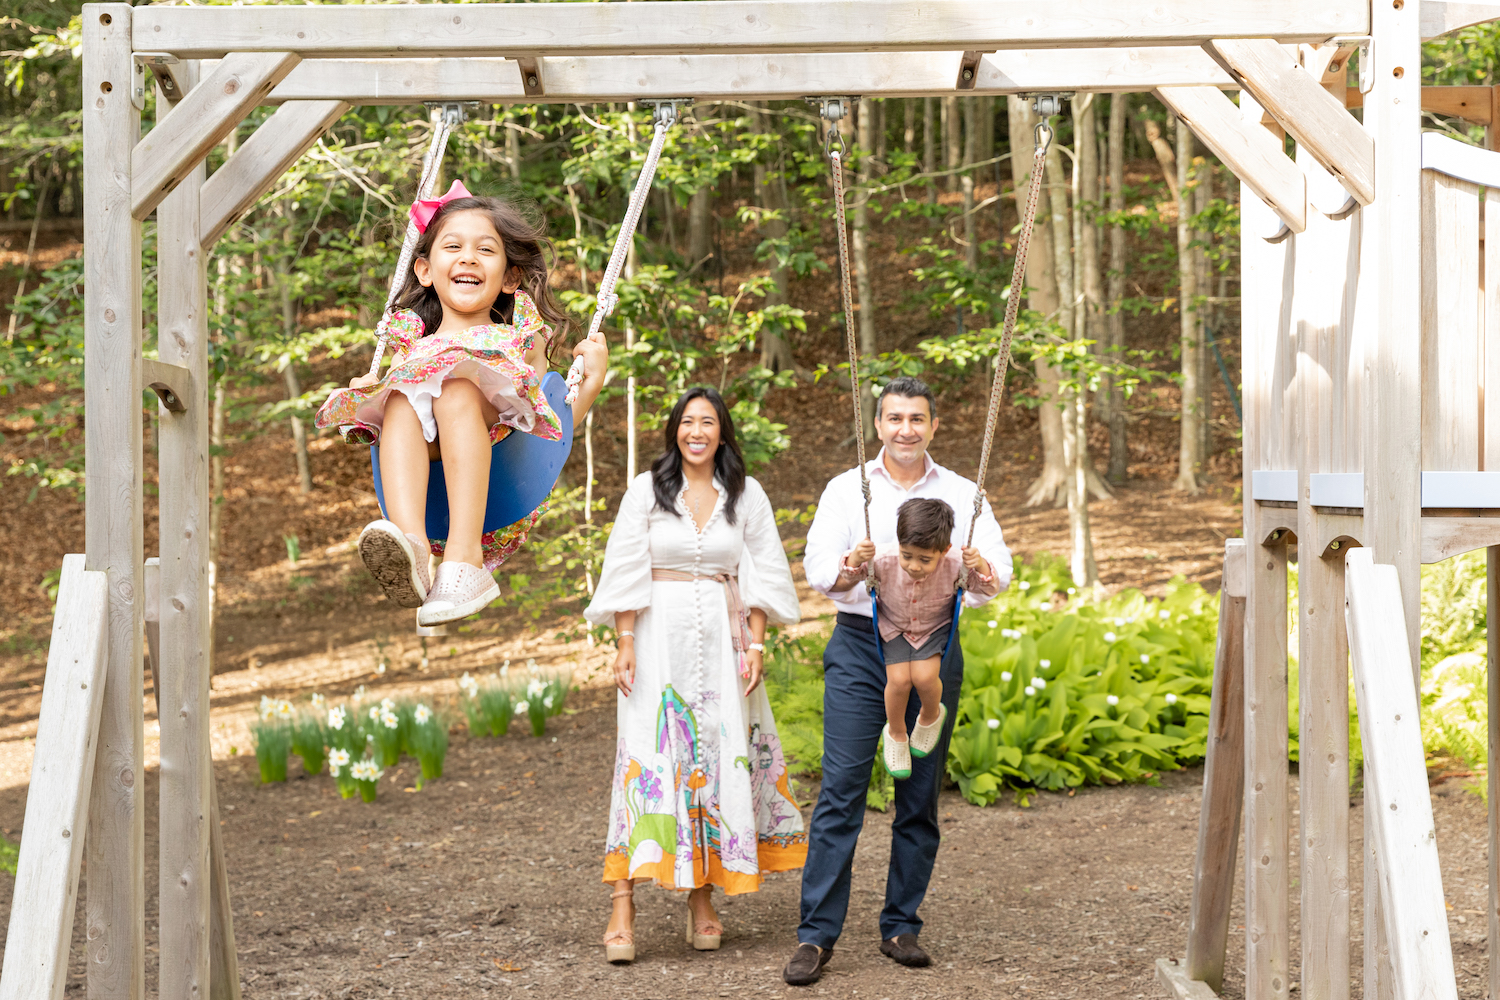 A family photo session on a swing set. 